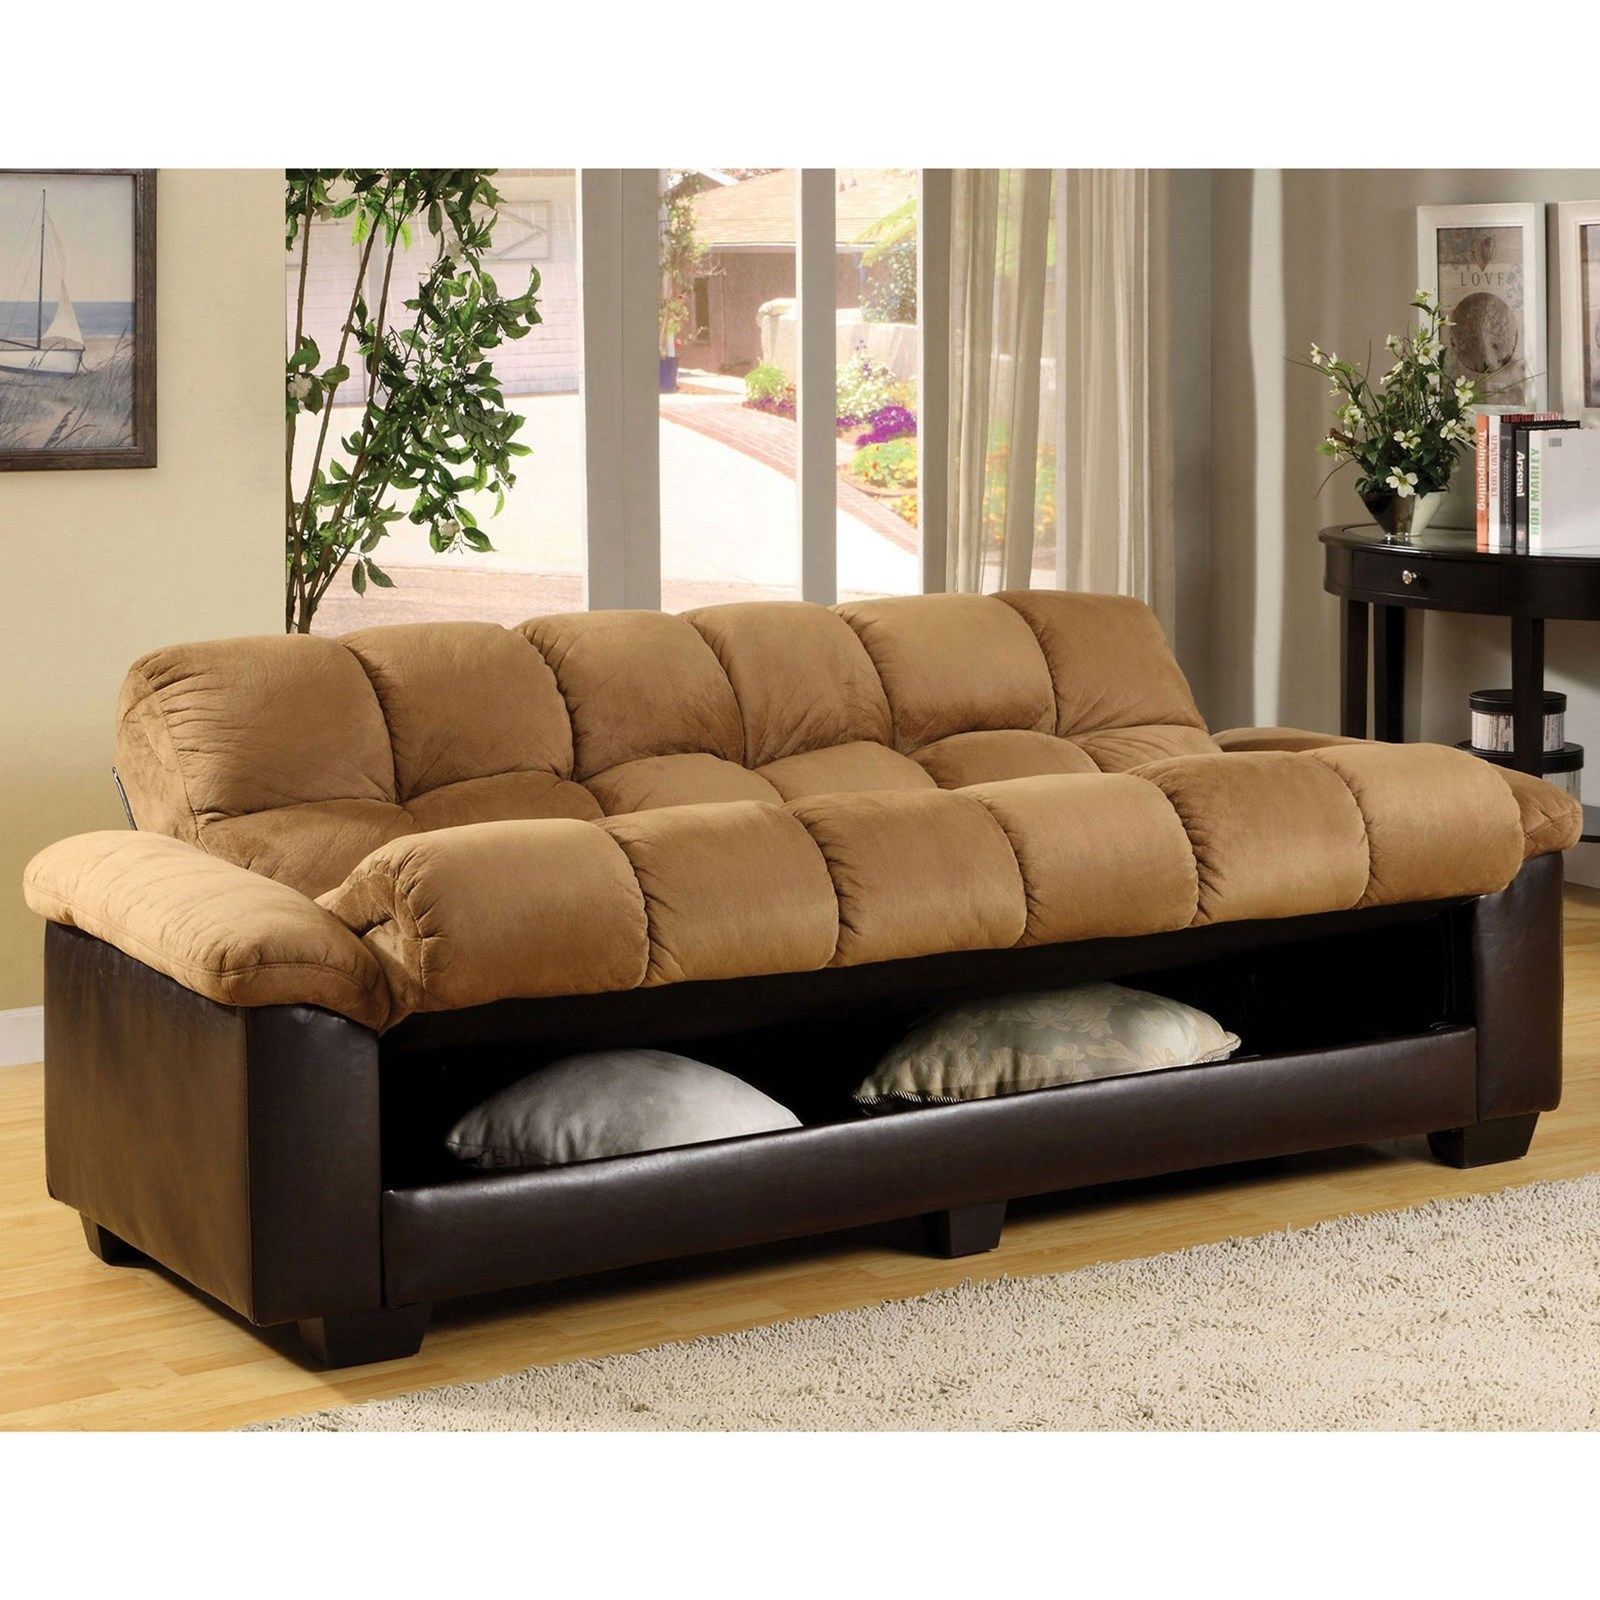 Furniture Of America Brantford Cm6685 Pu Ca Pk Convertible With Convertible Sofas (View 9 of 15)